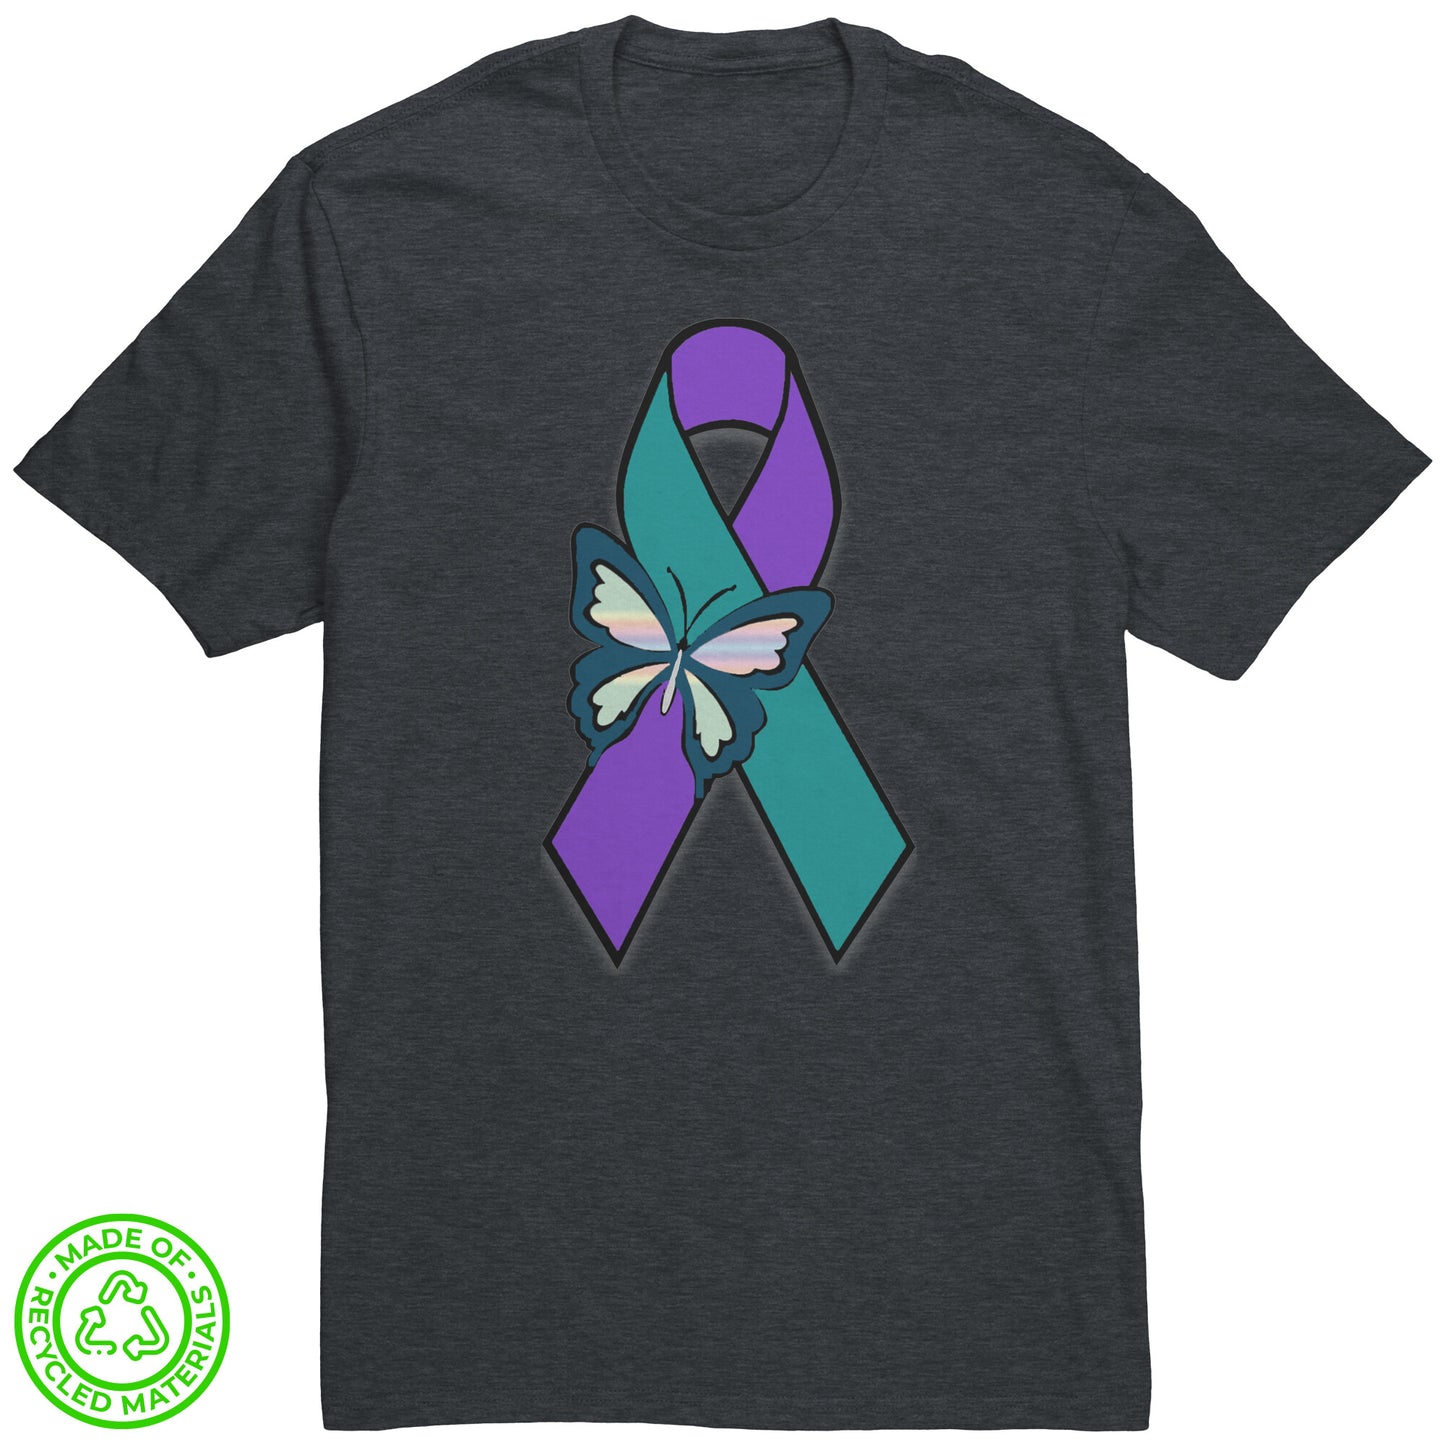 Suicide Awareness Butterfly Ribbon Recycled Fabric T-Shirt